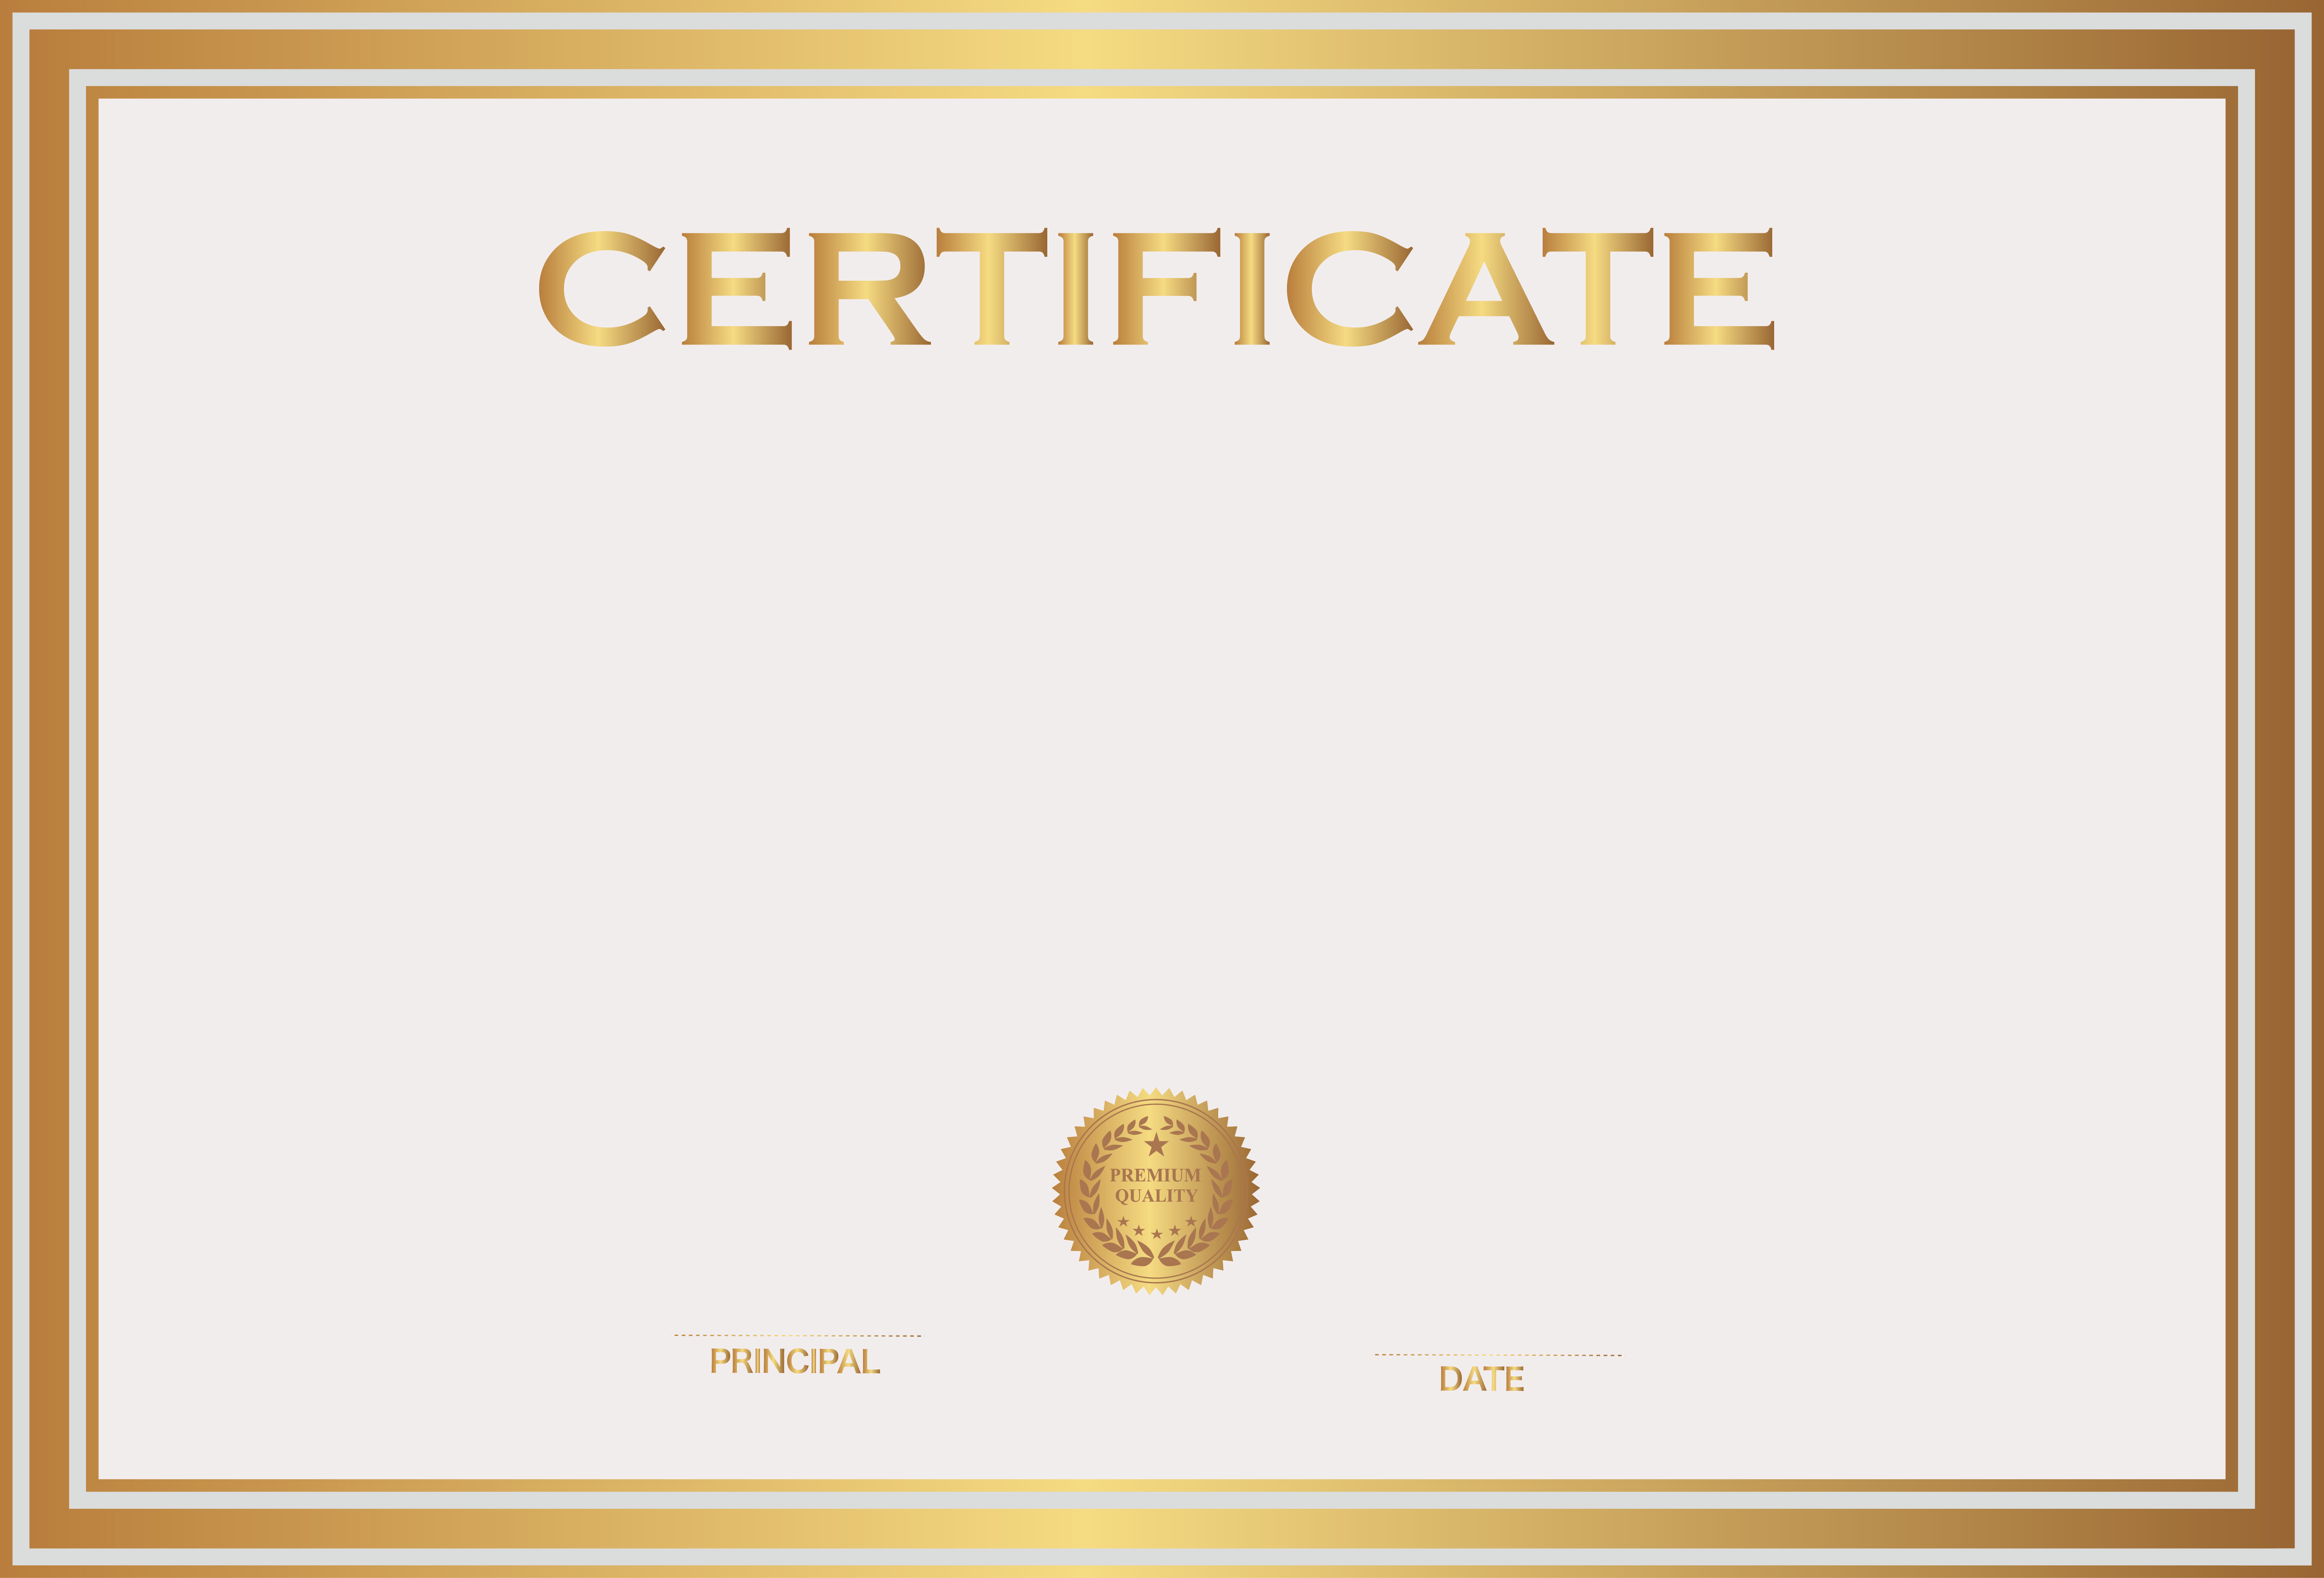 Certificate Template Free PNG Image